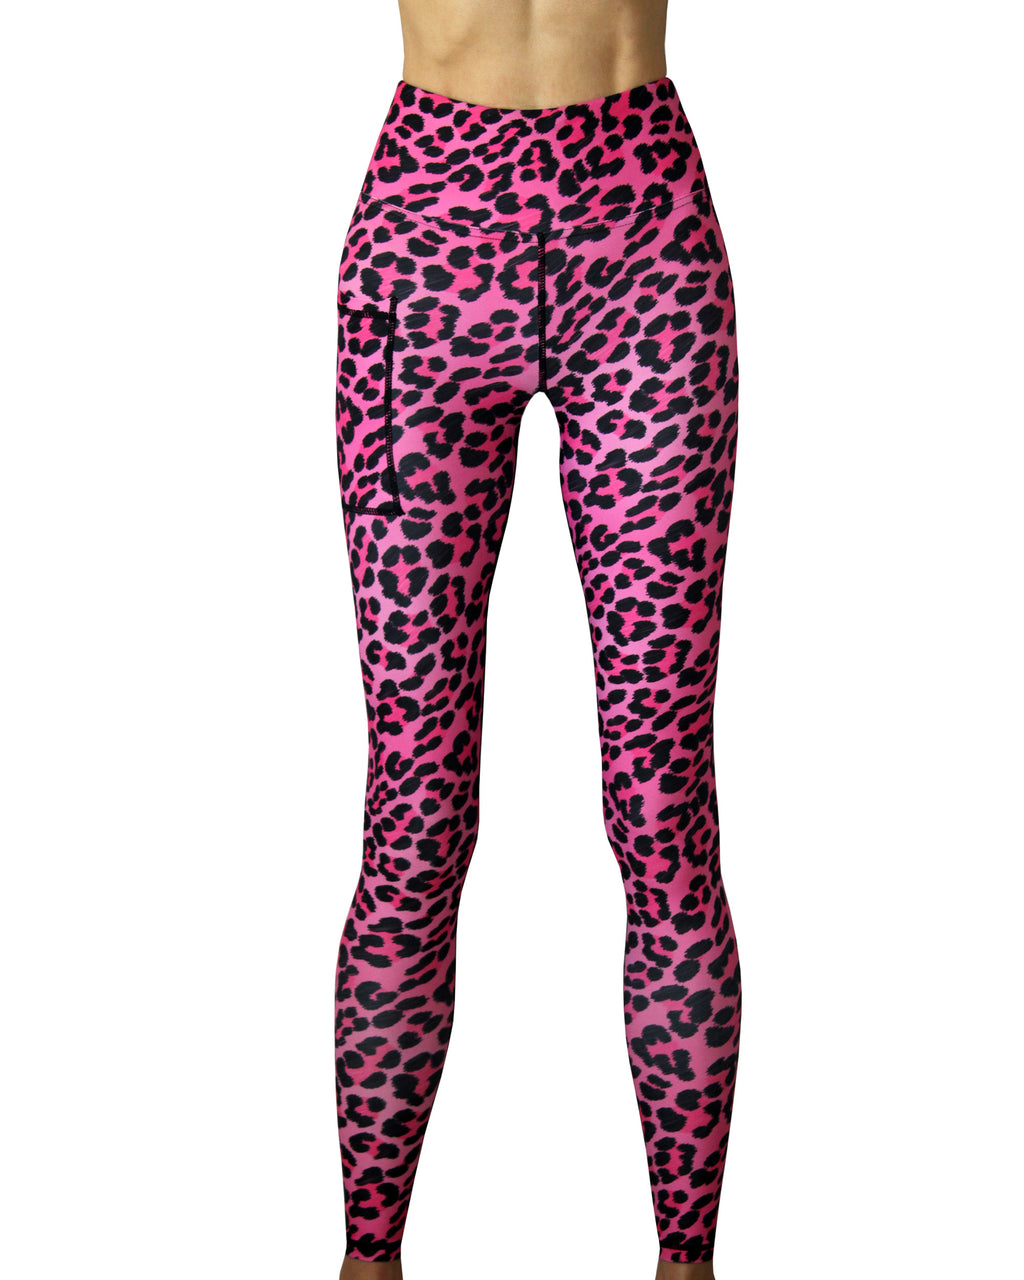 Pink and black leopard women's workout and running leggings made by Vivolicious in Cape Town.  